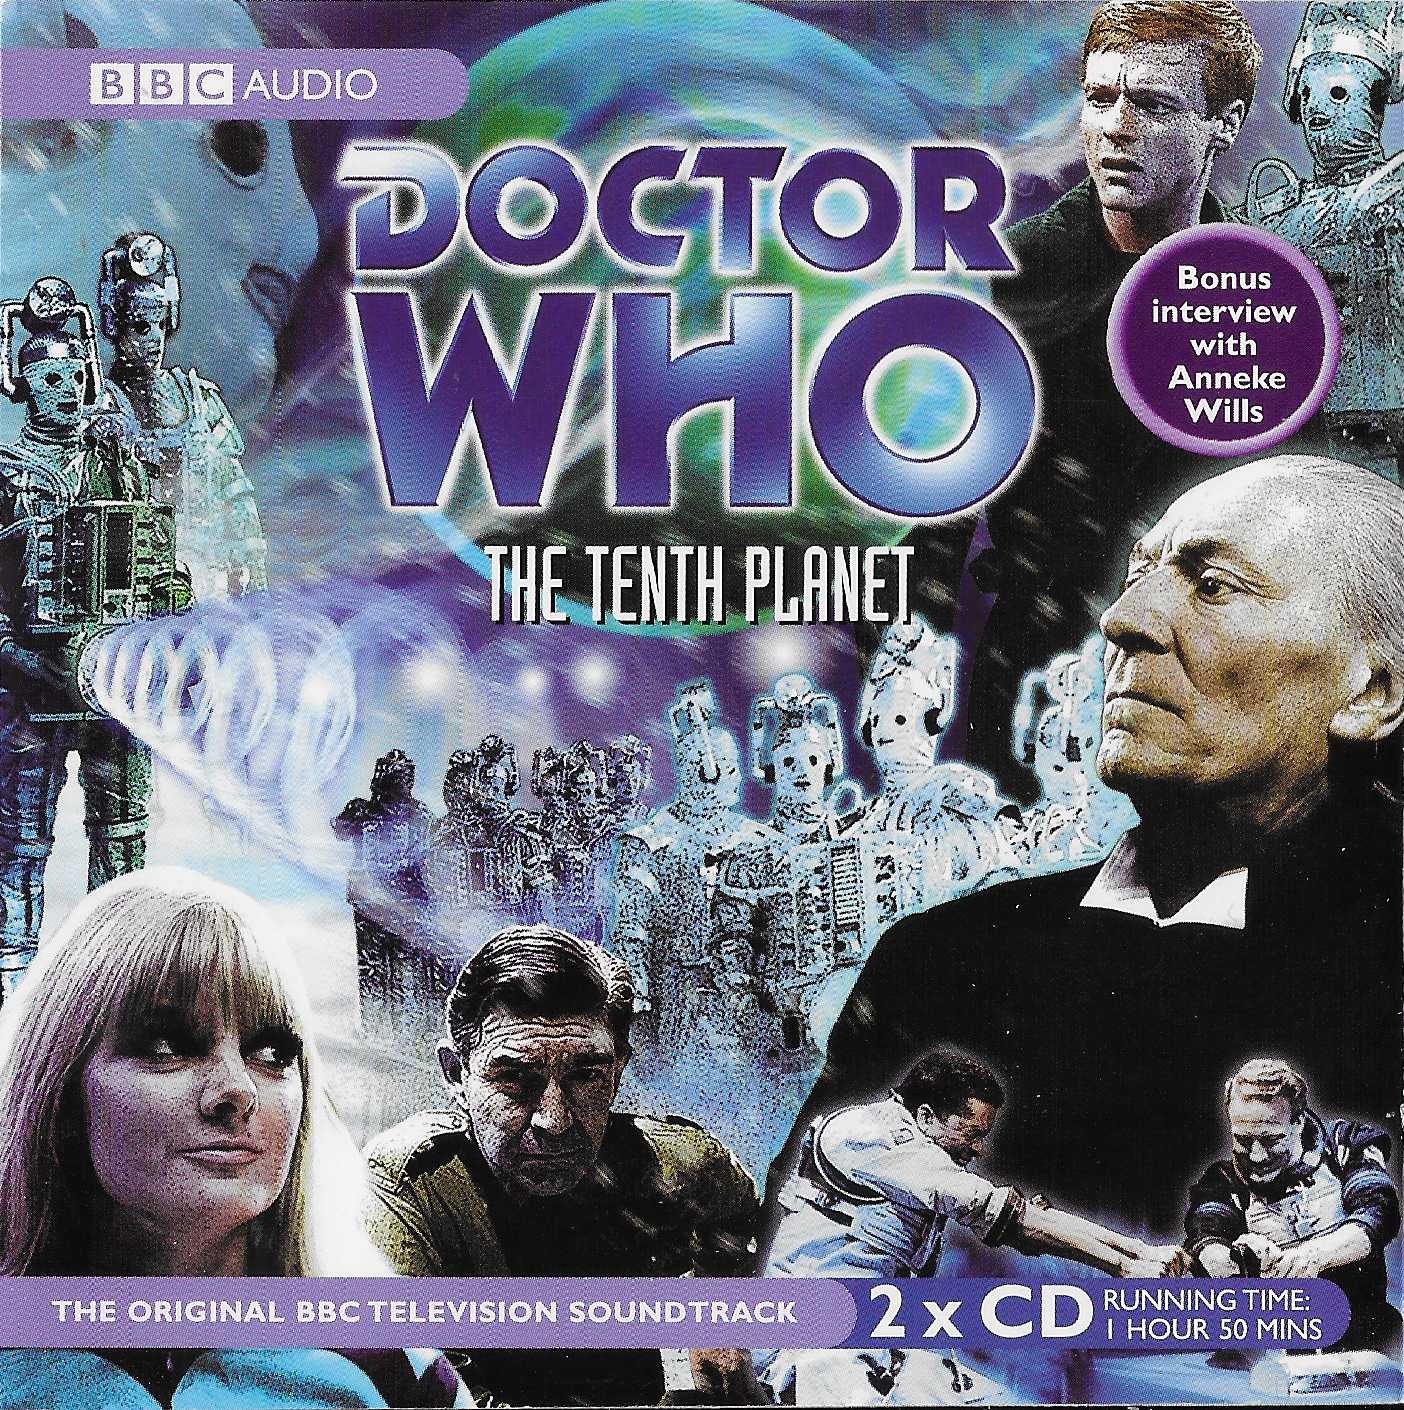 Picture of ISBN 0-563-52332-8 Doctor Who - The tenth planet by artist Kit Peddler / Gerry Davis from the BBC records and Tapes library